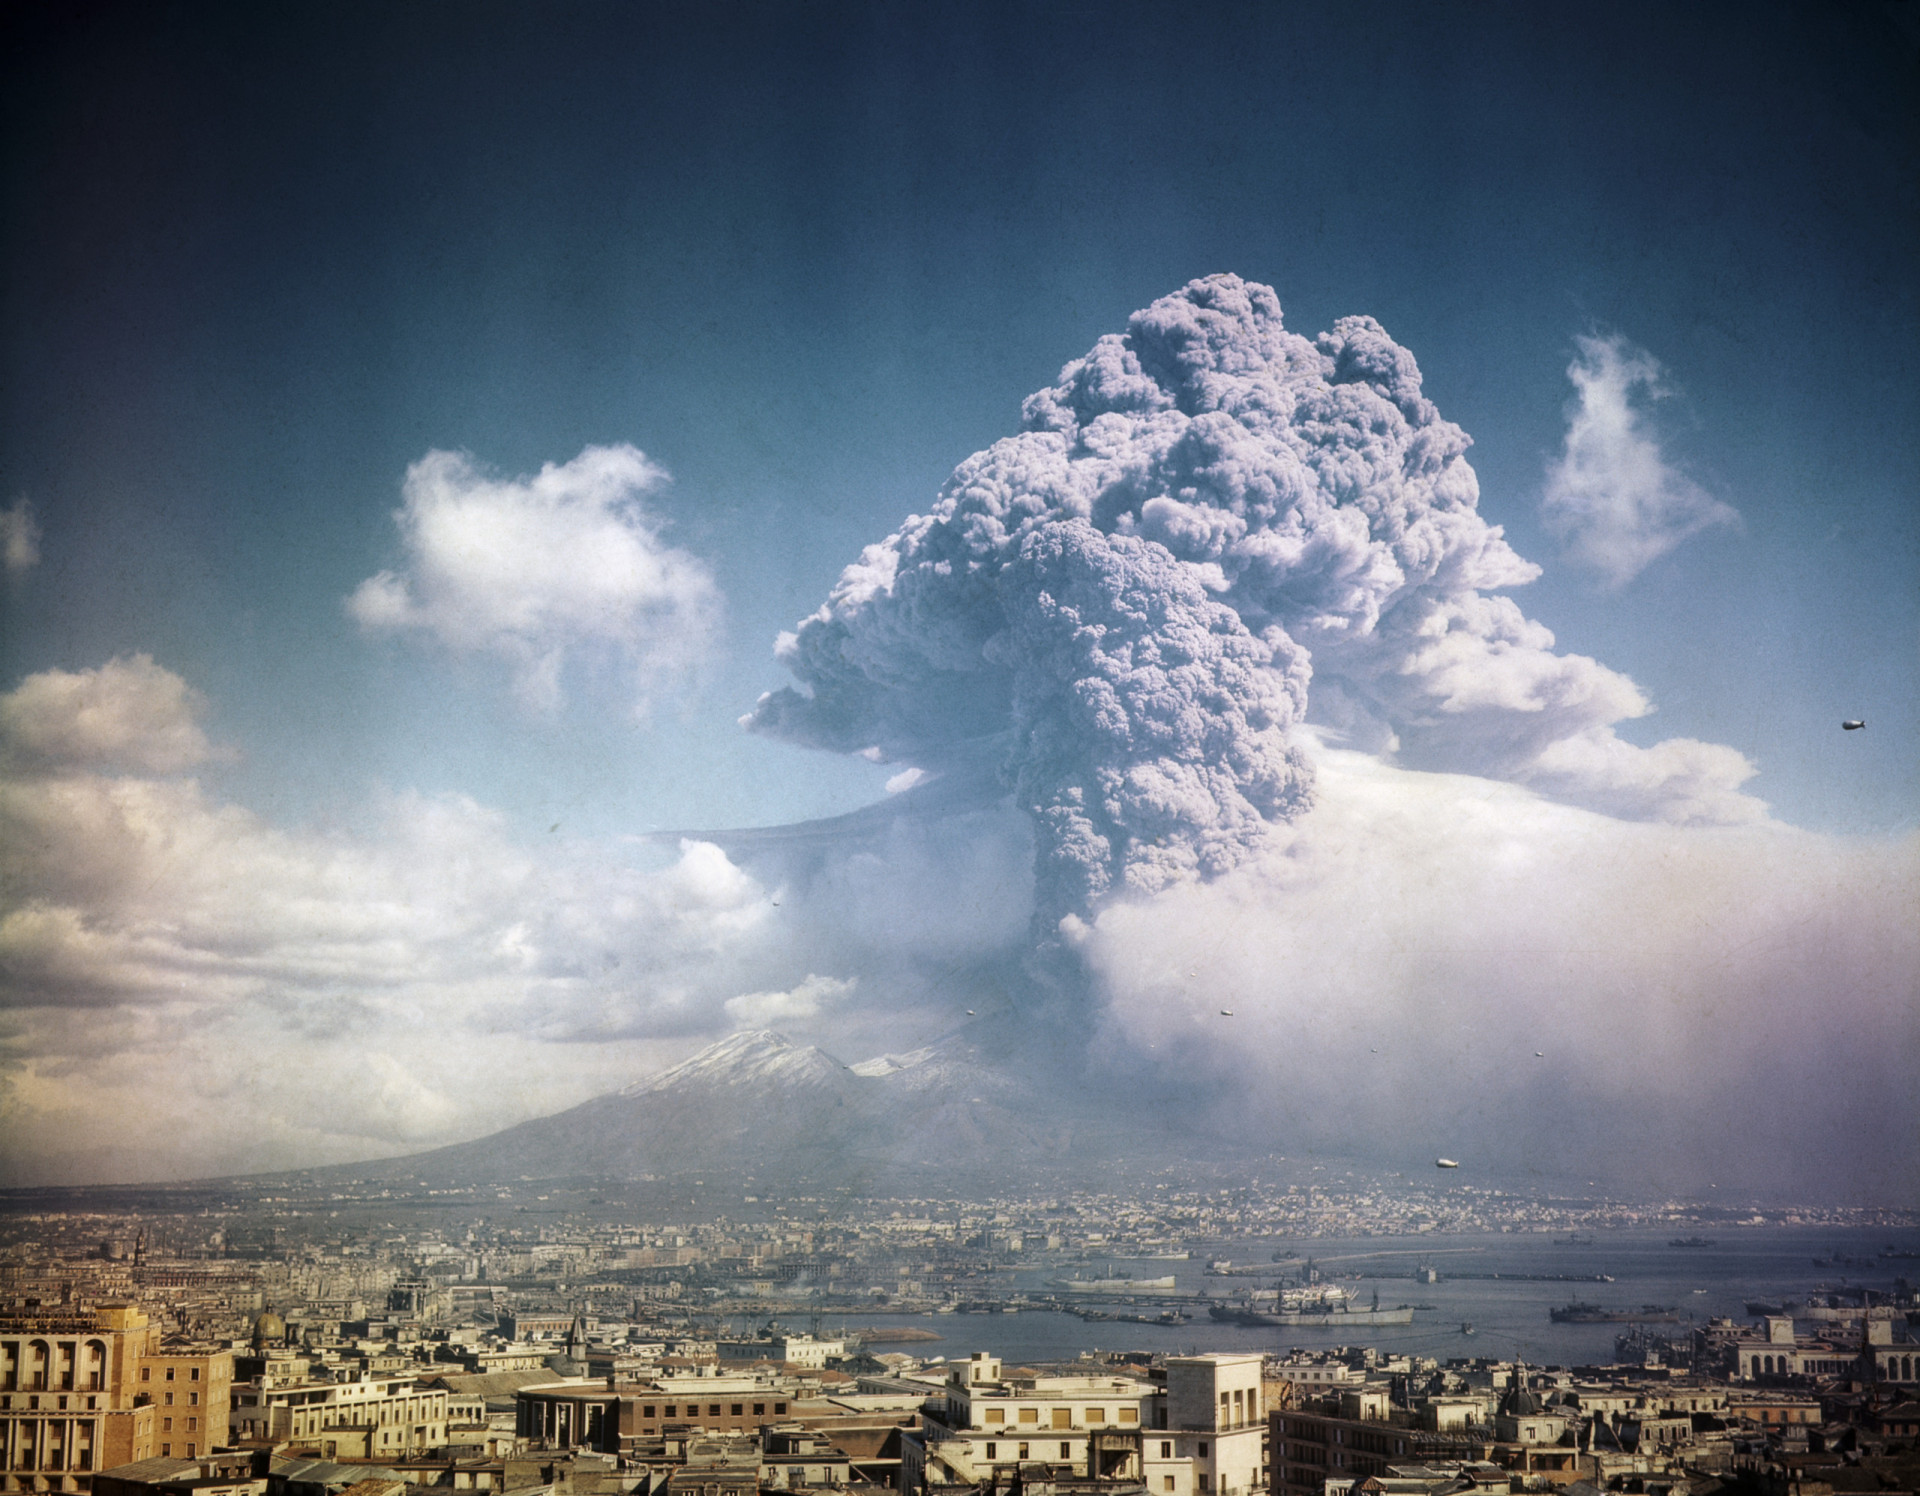 <p>Among the most famous volcanoes in the world, Vesuvius is relatively young, having been formed around 200,000 years ago. Worryingly active, the last major eruption took place in March 1944 (pictured). But Vesuvius is, of course, known for causing one of the most devastating events in world history: the destruction of Pompeii.</p><p><a href="https://www.msn.com/en-us/community/channel/vid-7xx8mnucu55yw63we9va2gwr7uihbxwc68fxqp25x6tg4ftibpra?cvid=94631541bc0f4f89bfd59158d696ad7e">Follow us and access great exclusive content every day</a></p>